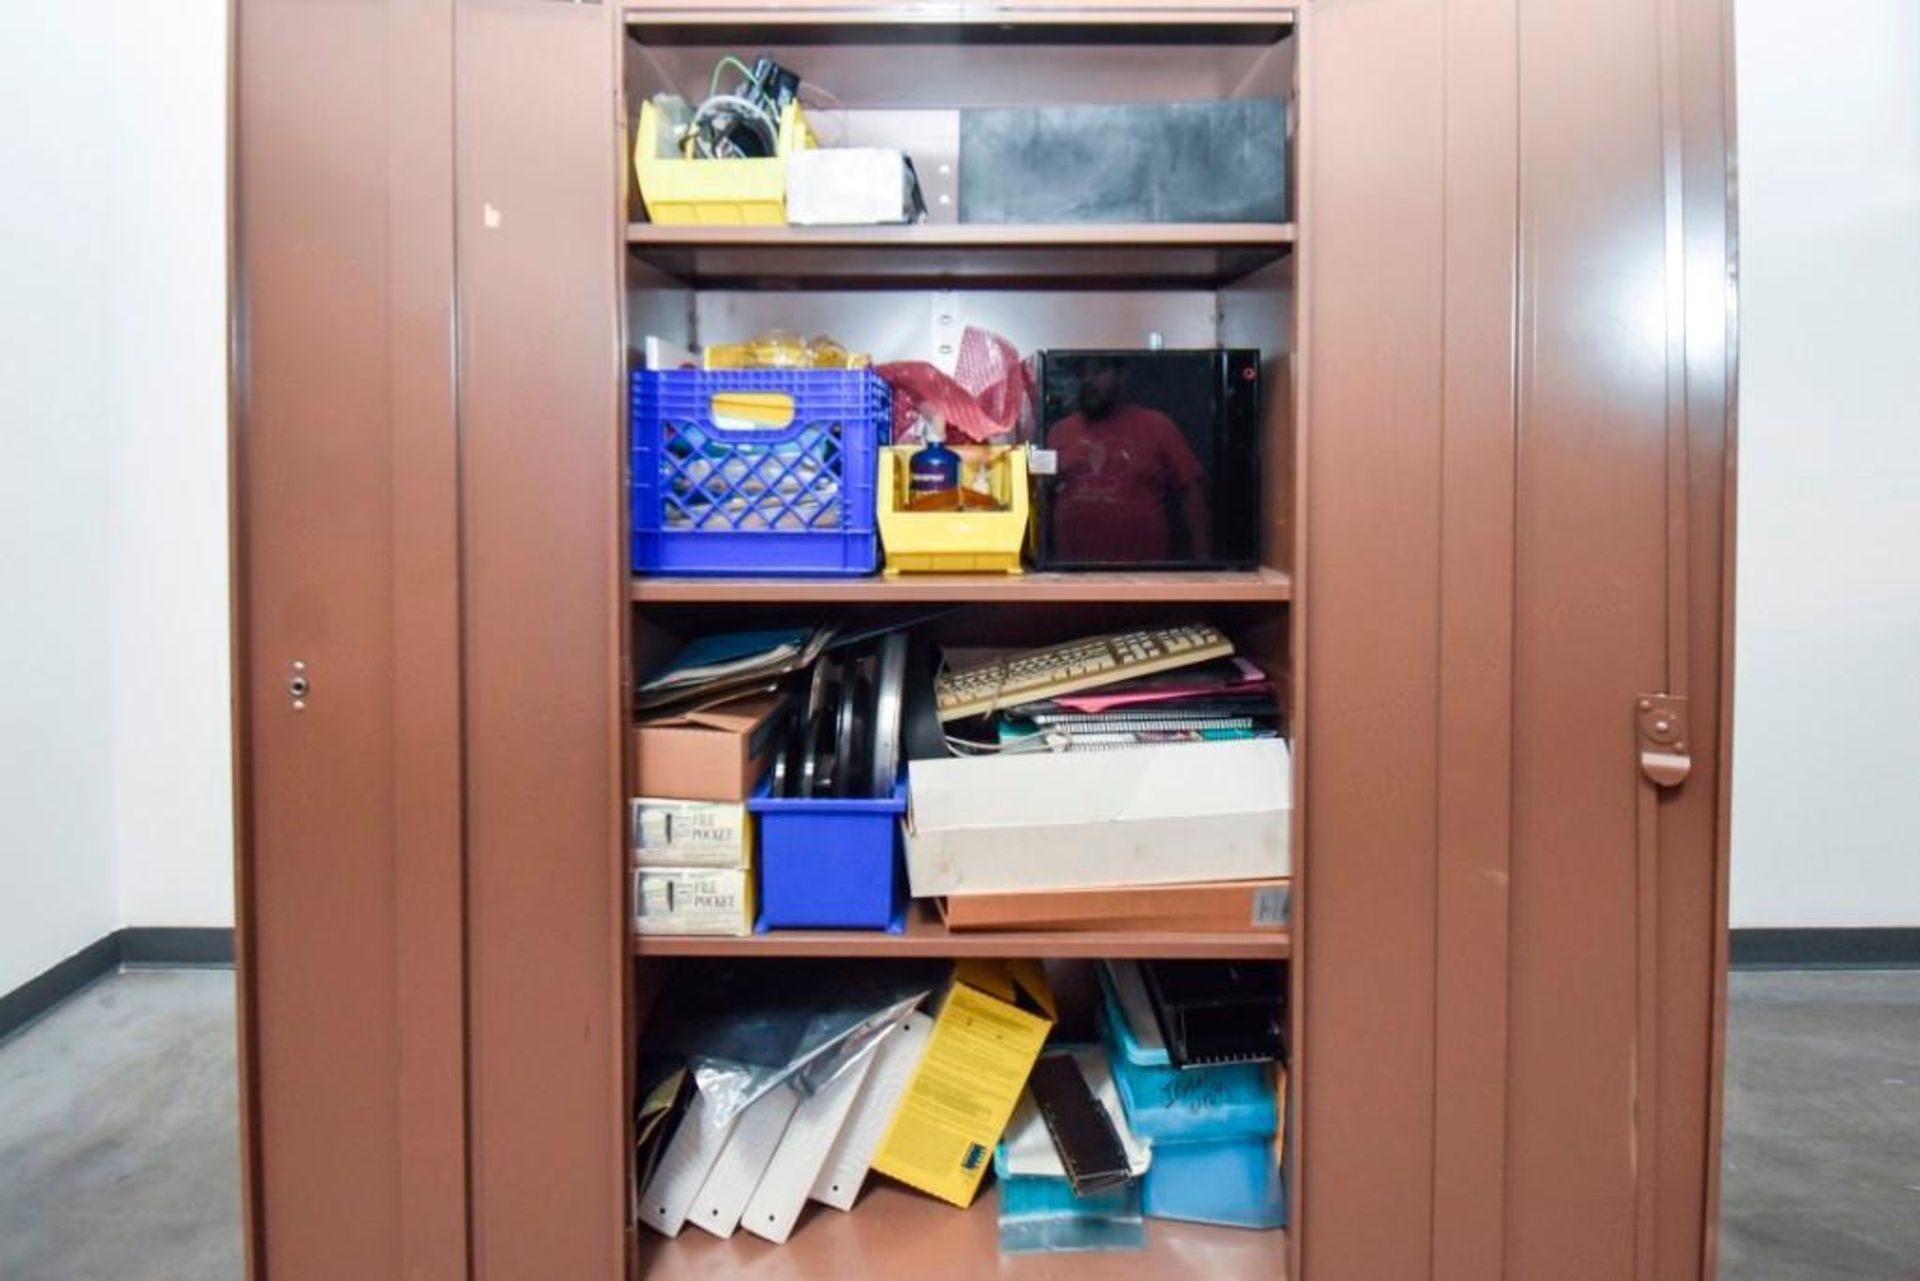 Parkwood Cabinet contains assorted office supplies, earplugs, and program manuals. - Image 2 of 6